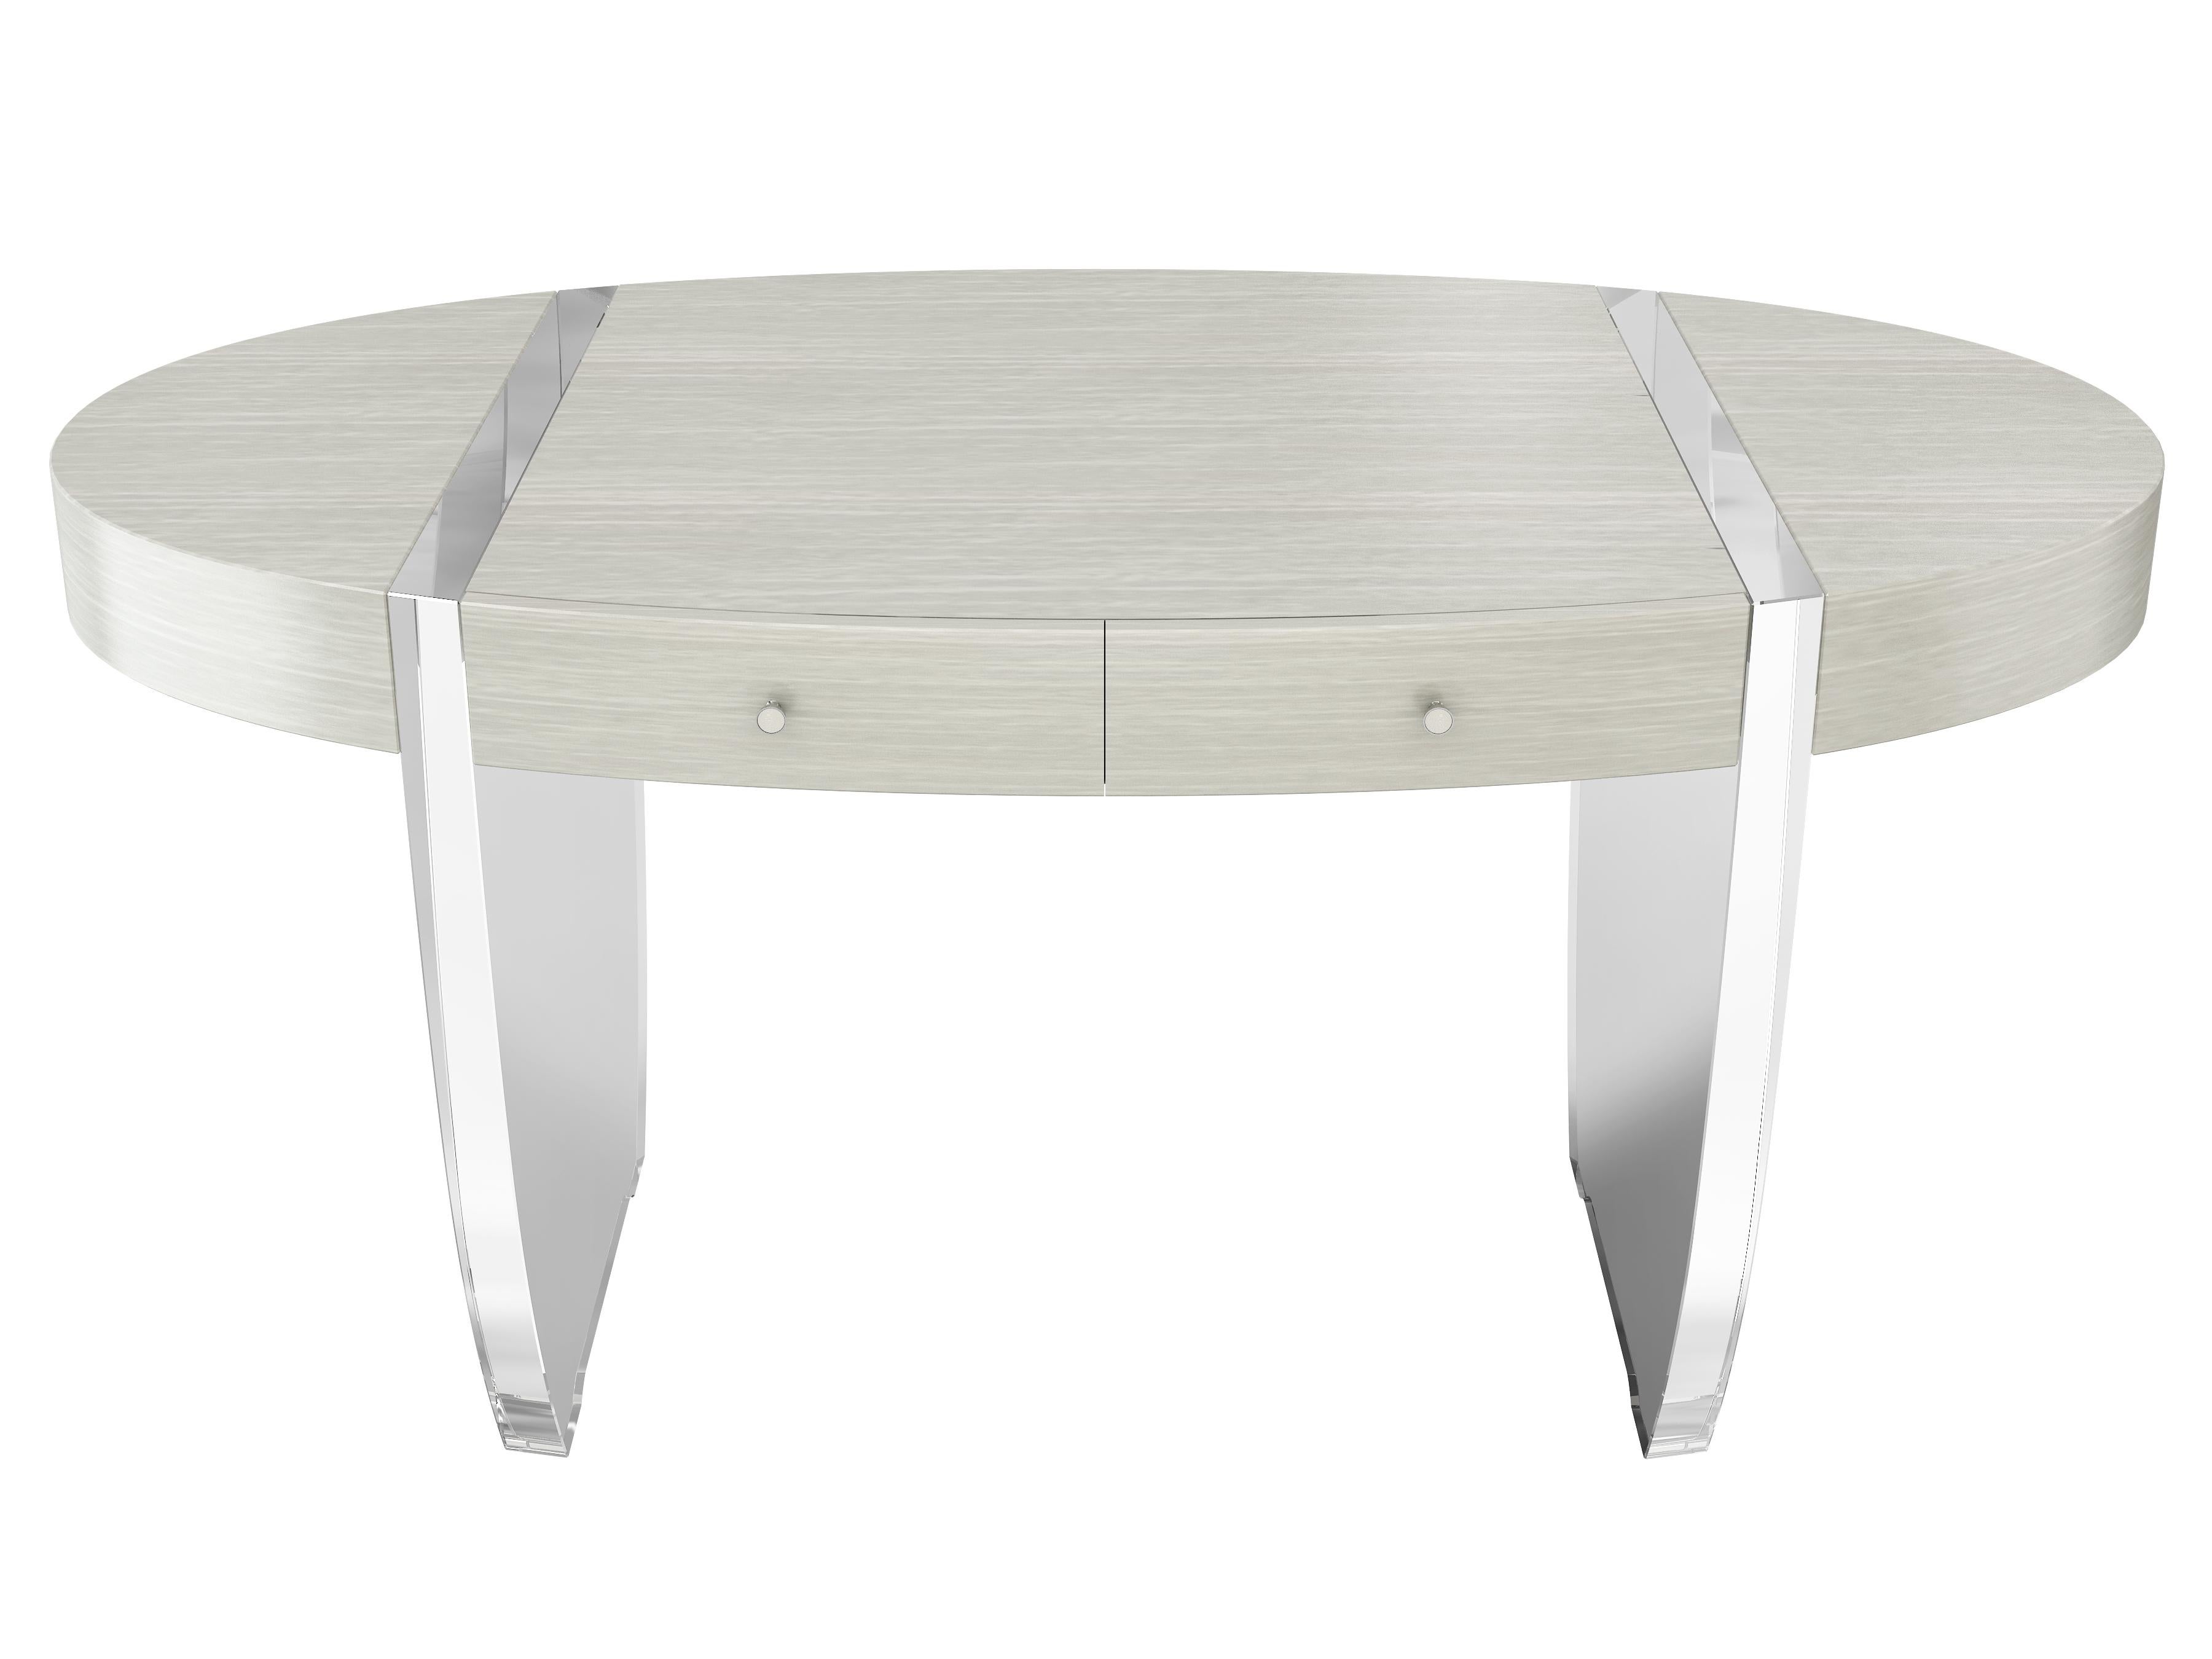 Modern Oval Desk - an elegant modern classic designed by Jonathan Franc - the oval top over a conforming frieze with two drawers, each opening to fitted drawer box interiors with cream colored ultra-suede lined pull out trays, all raised on two